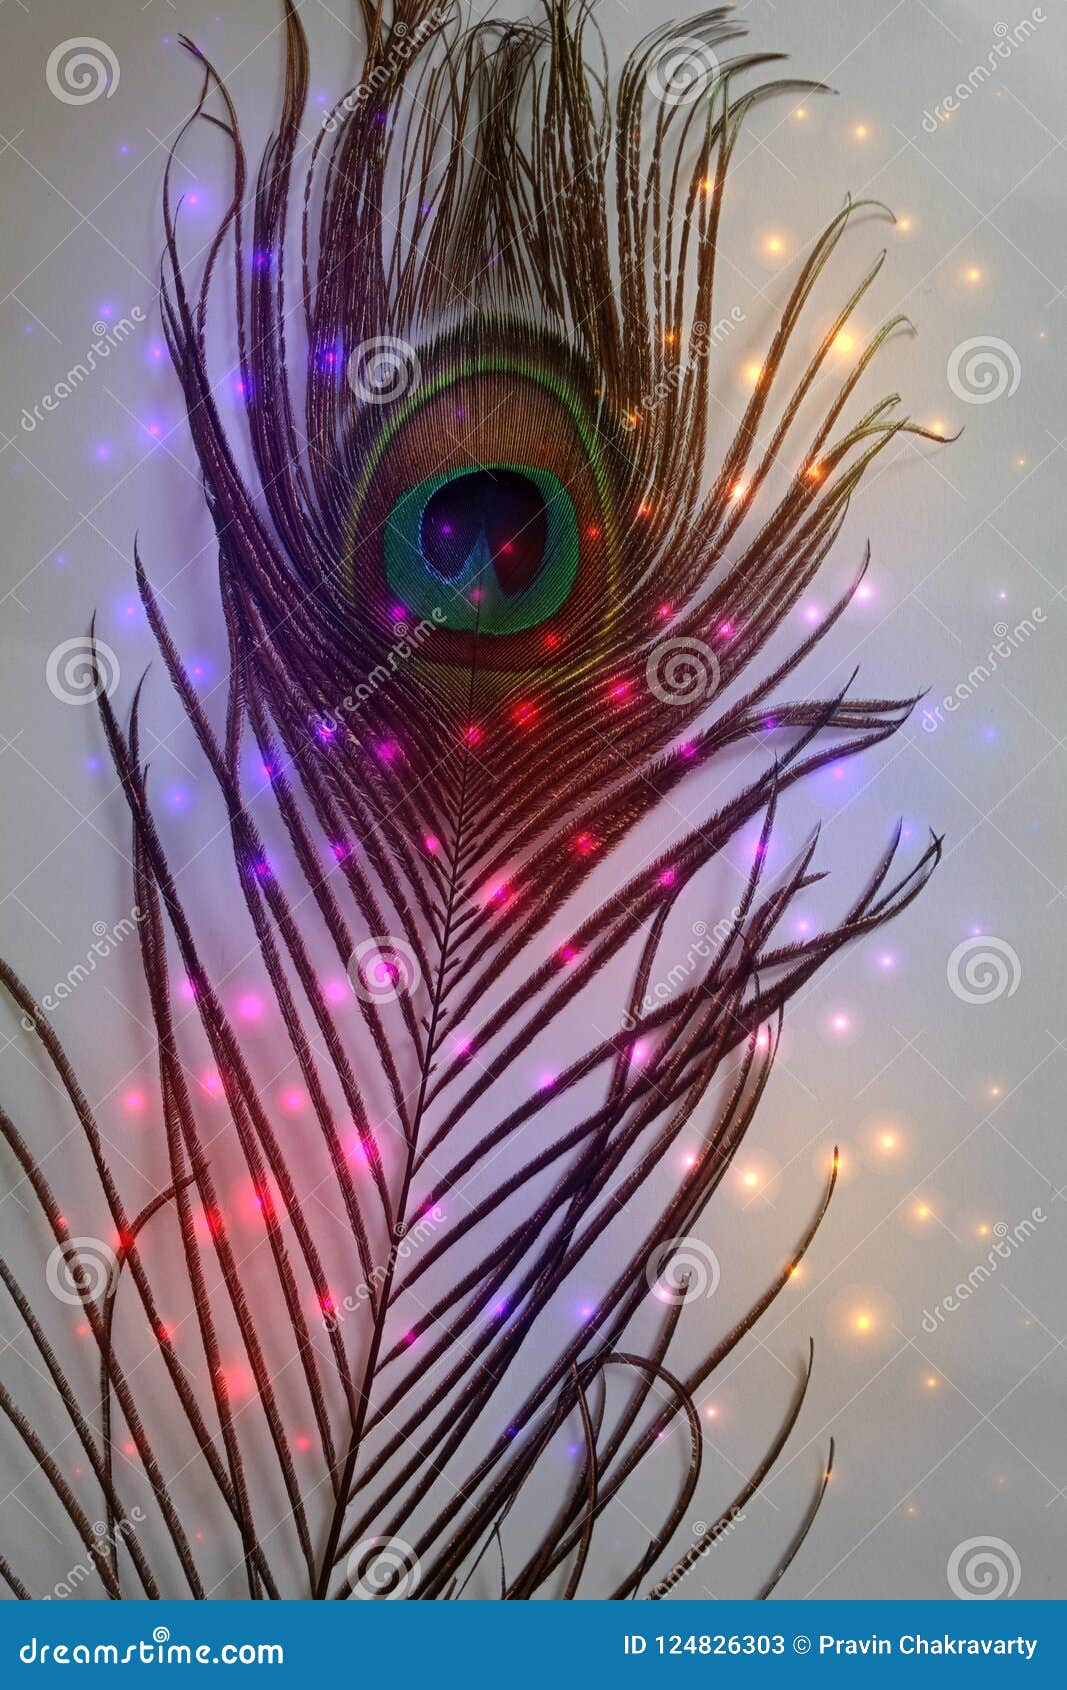 Female Hand Covered With Holographic Shining Glitter Holding Peacock Feather  Under Neon Colored Light Body Art Glamorous Conceptual Fashion Style  Stock Photo Picture And Royalty Free Image Image 181089580